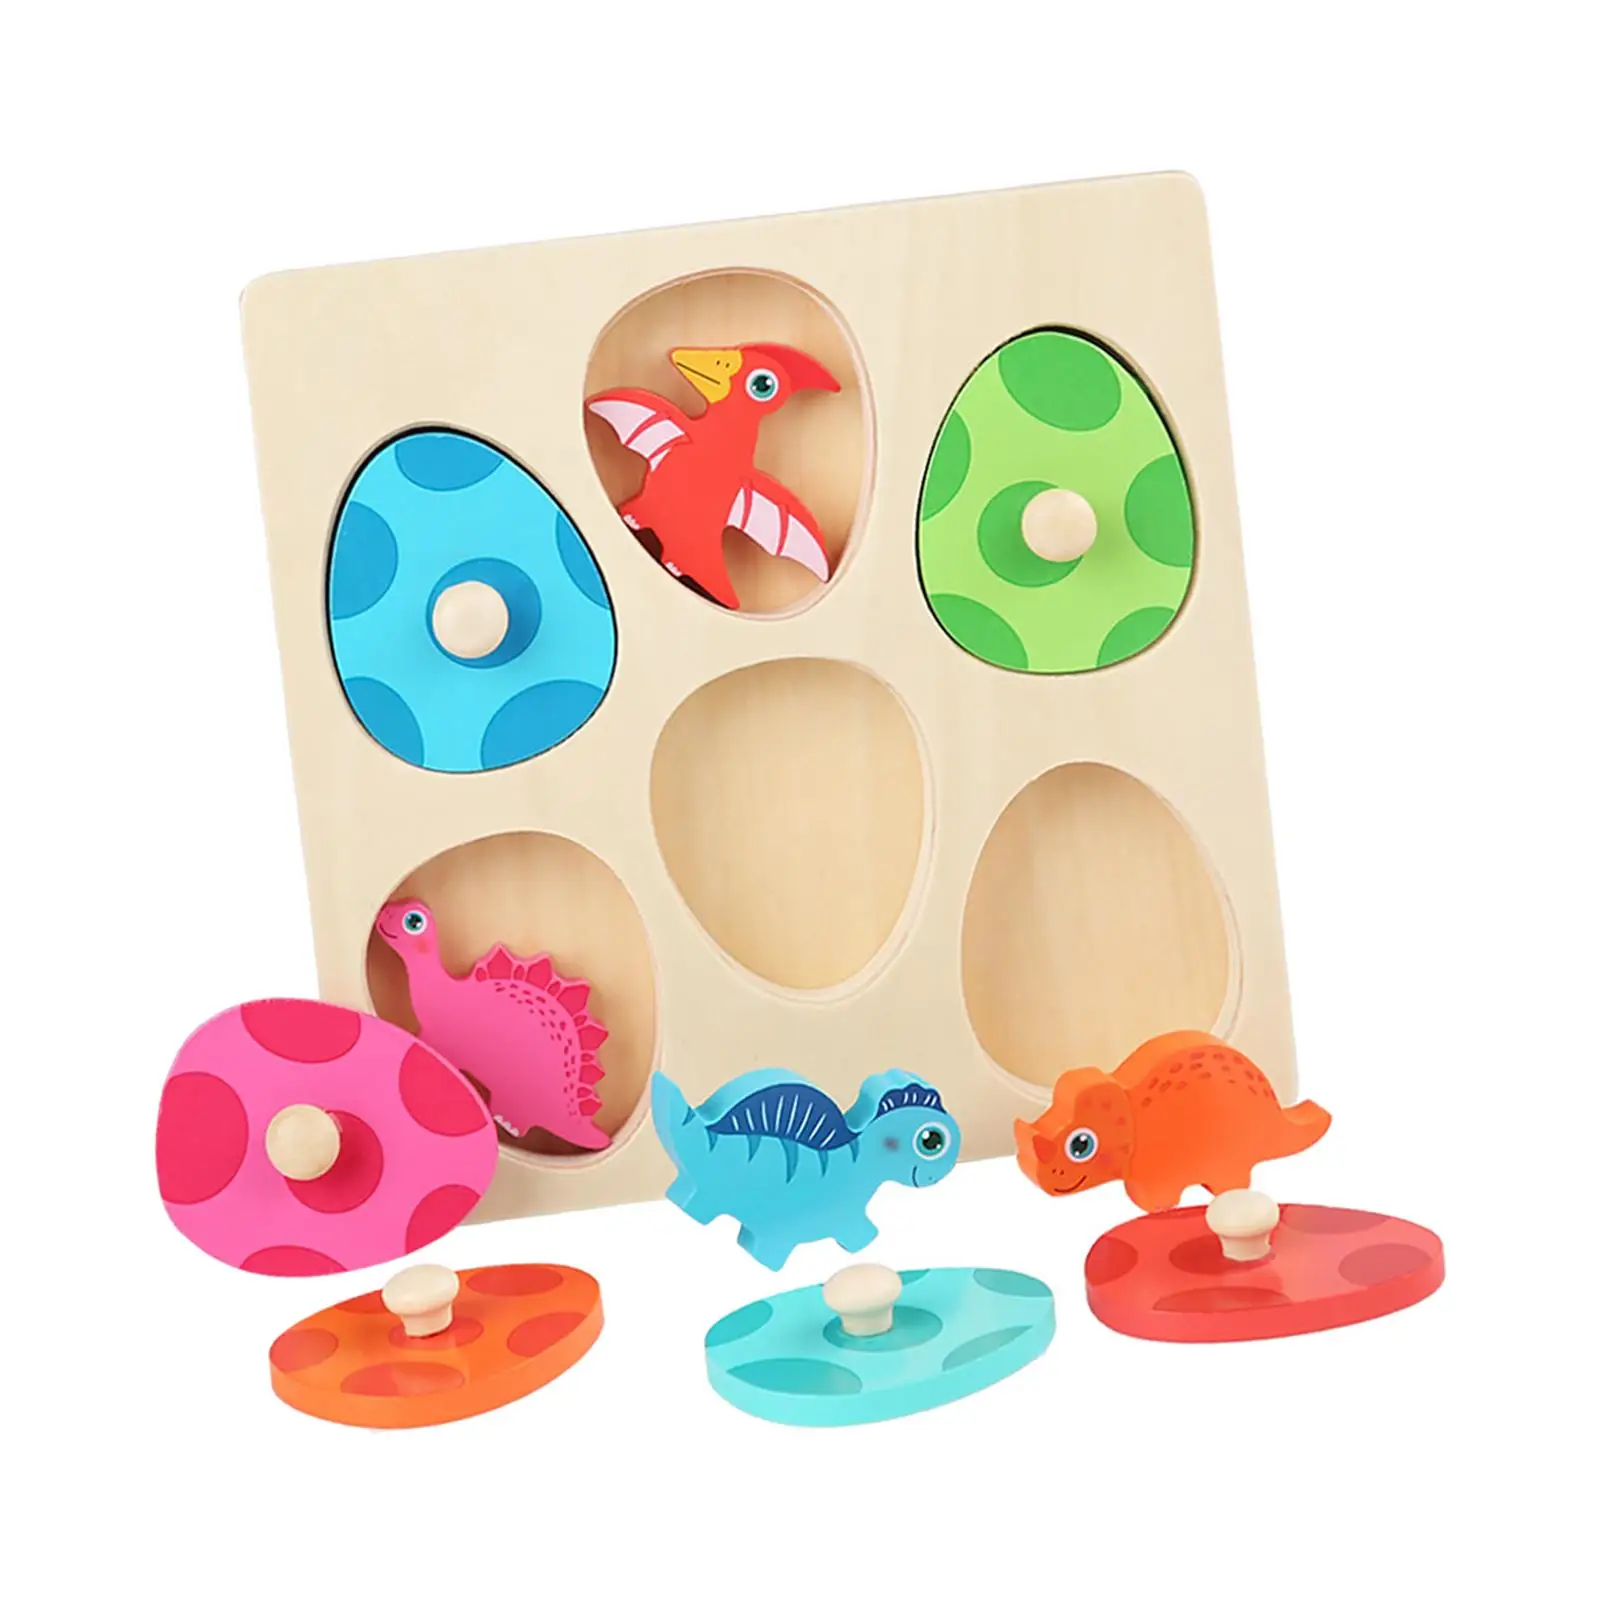 

Wooden Peg Puzzles Dinosaur Egg Kids Toy Dinosaurs Wooden Puzzle for Ages 1 2 3 Boy and Girls Baby Preschool Birthday Gifts